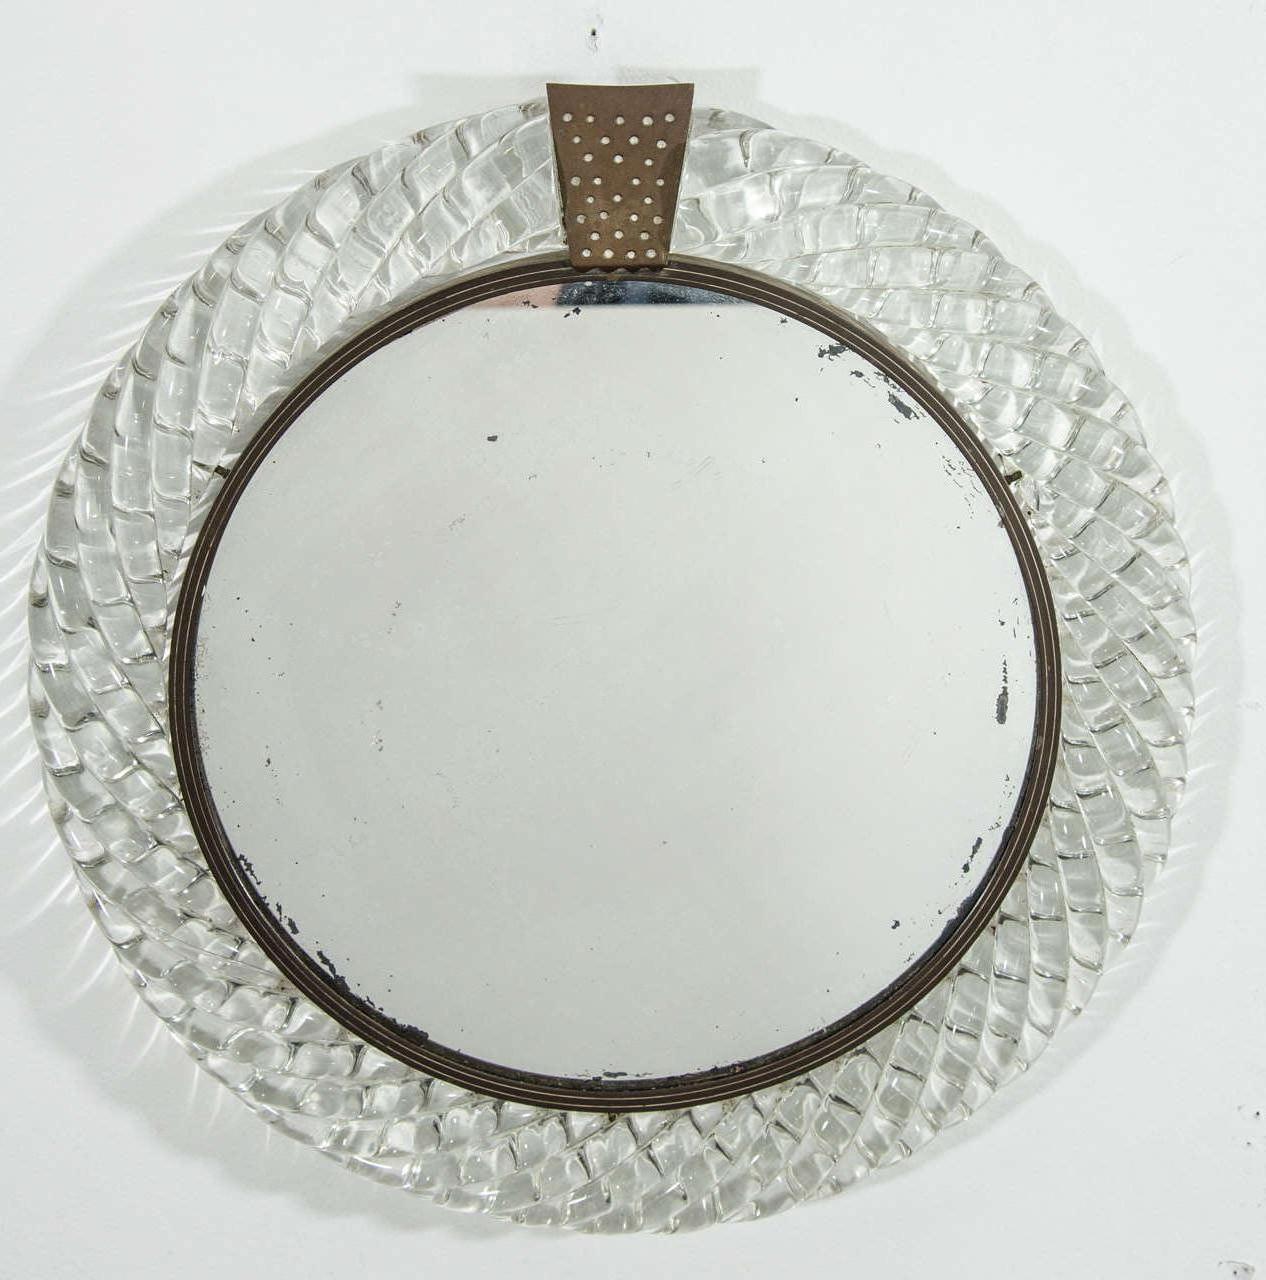 An Italian Murano clear art glass 'treccia' ('braid') framed round wall mirror with bronze decorative accent, circa mid-20th century, Italy. Mirror could work well in many areas including a vanity area or small space area such as a closet, dressing